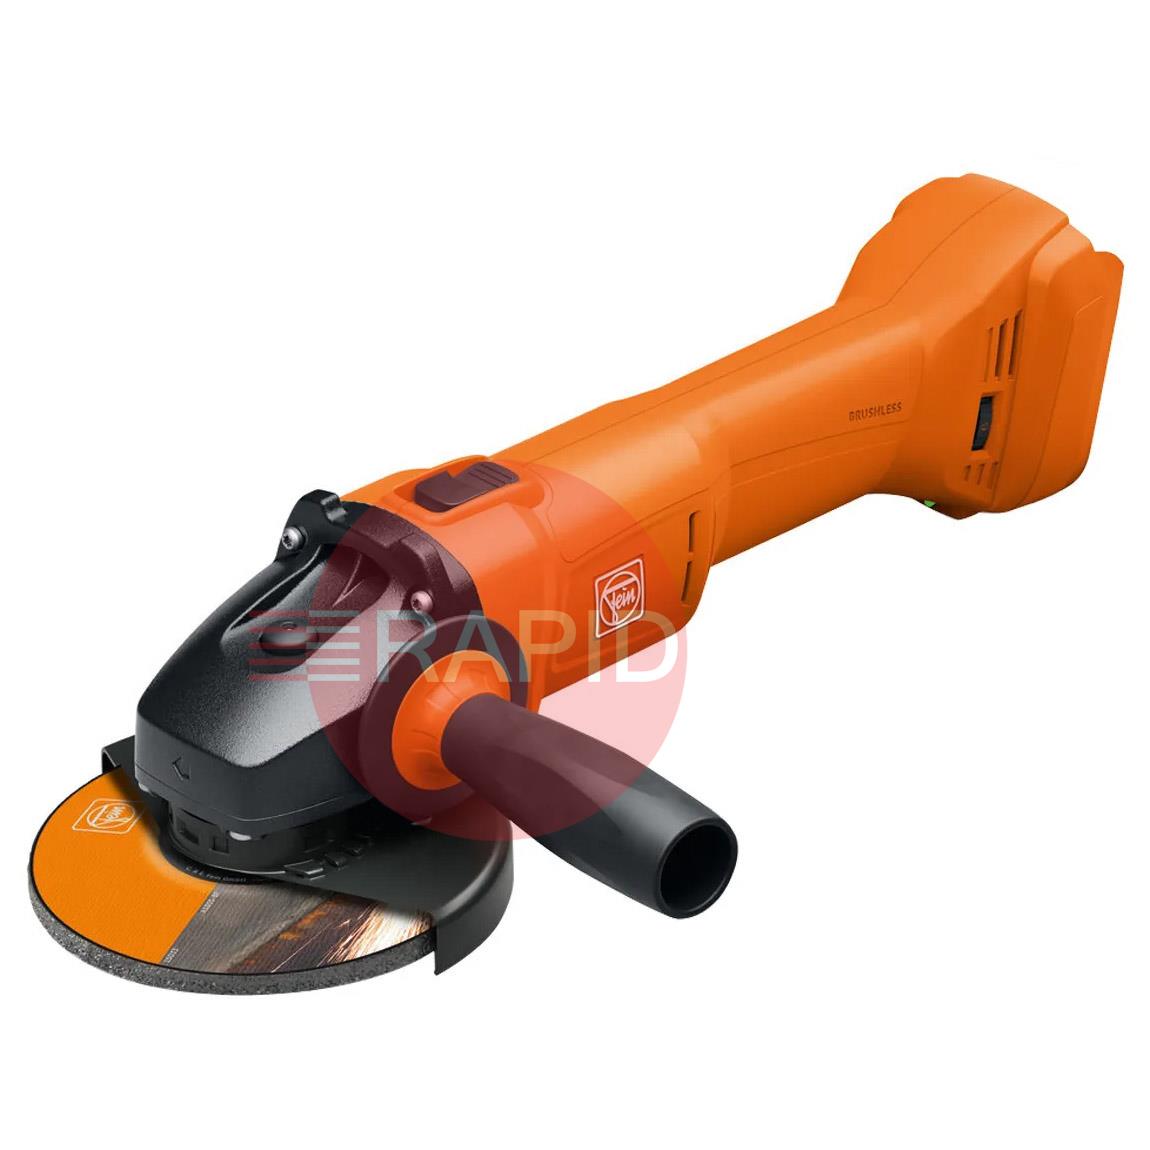 71220261000  FEIN CCG 18-125-10 AS Cordless Compact 125mm 18V Angle Grinder (Bare Unit)